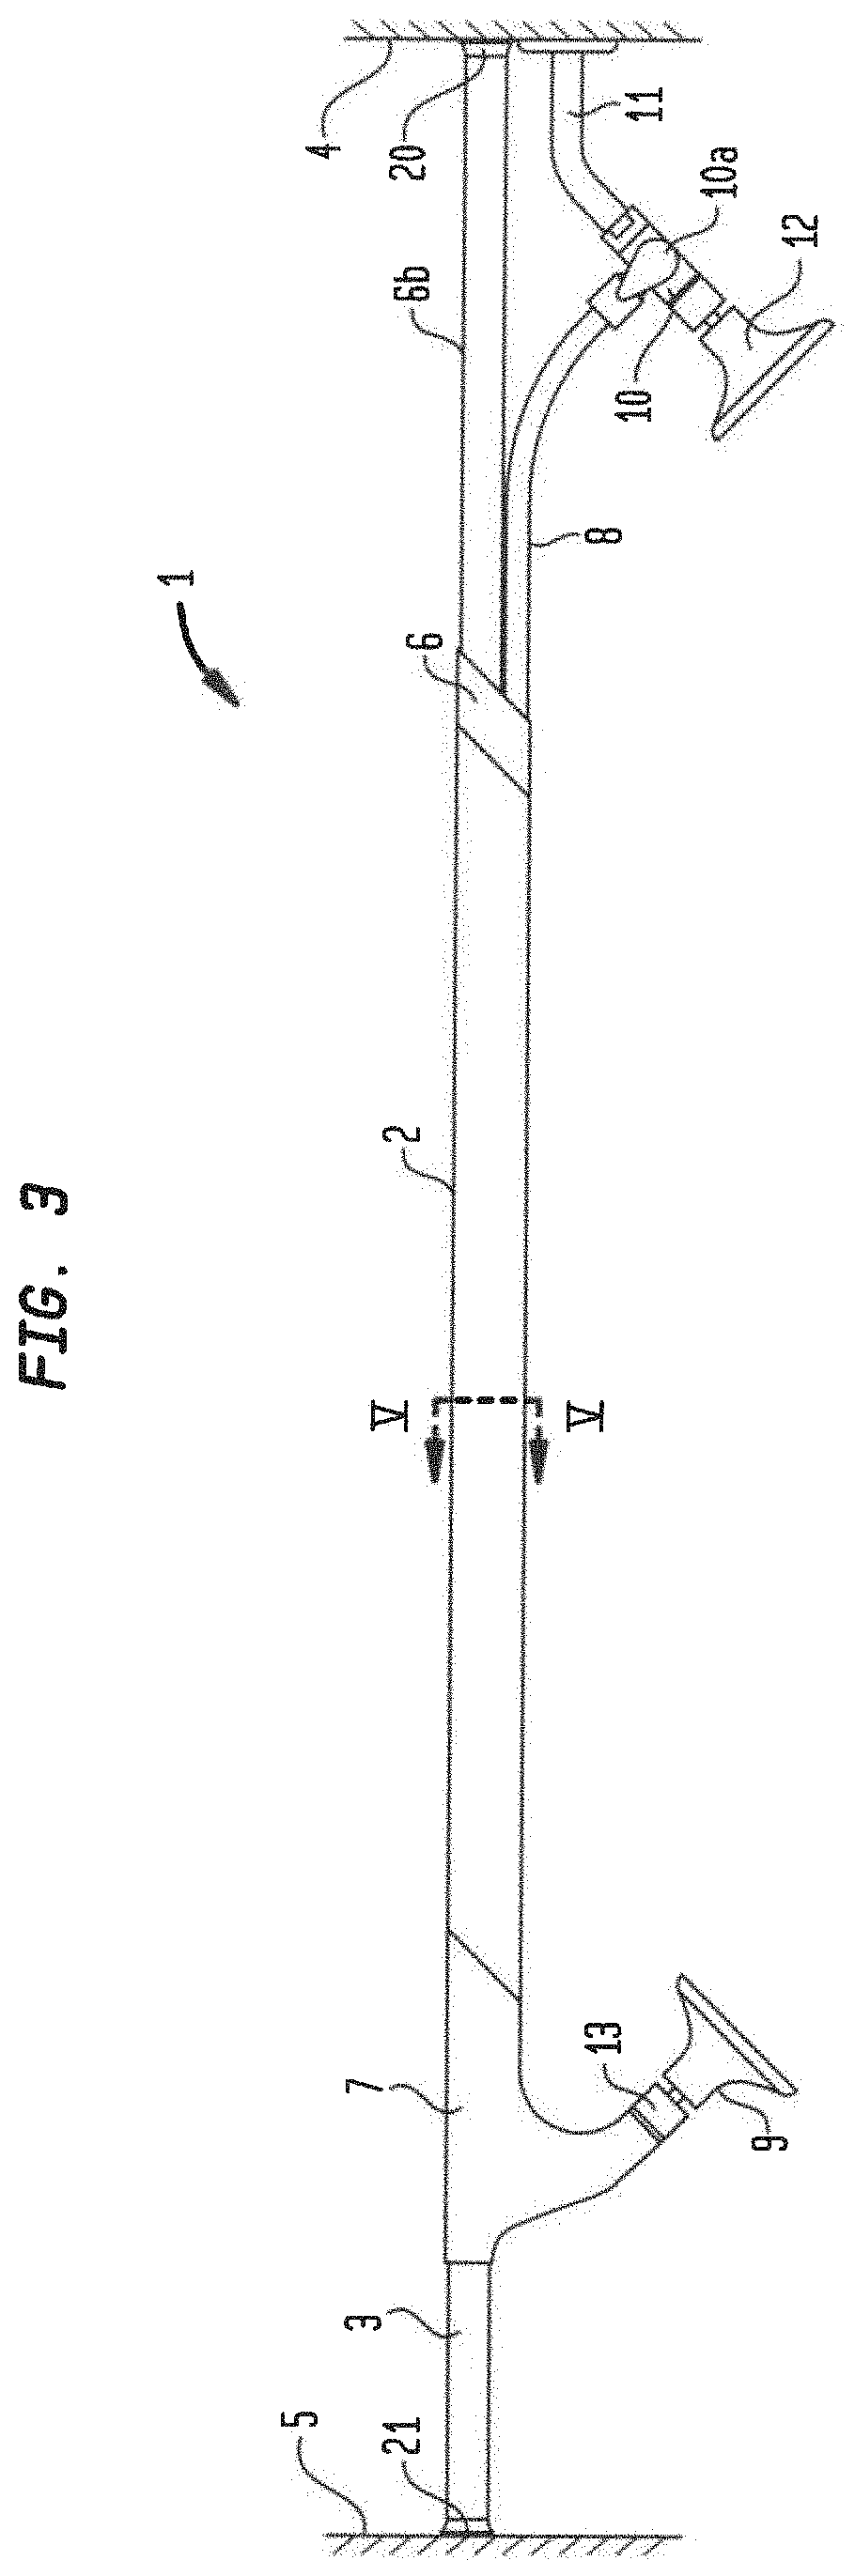 Shower assembly and method of attaching such a shower assembly